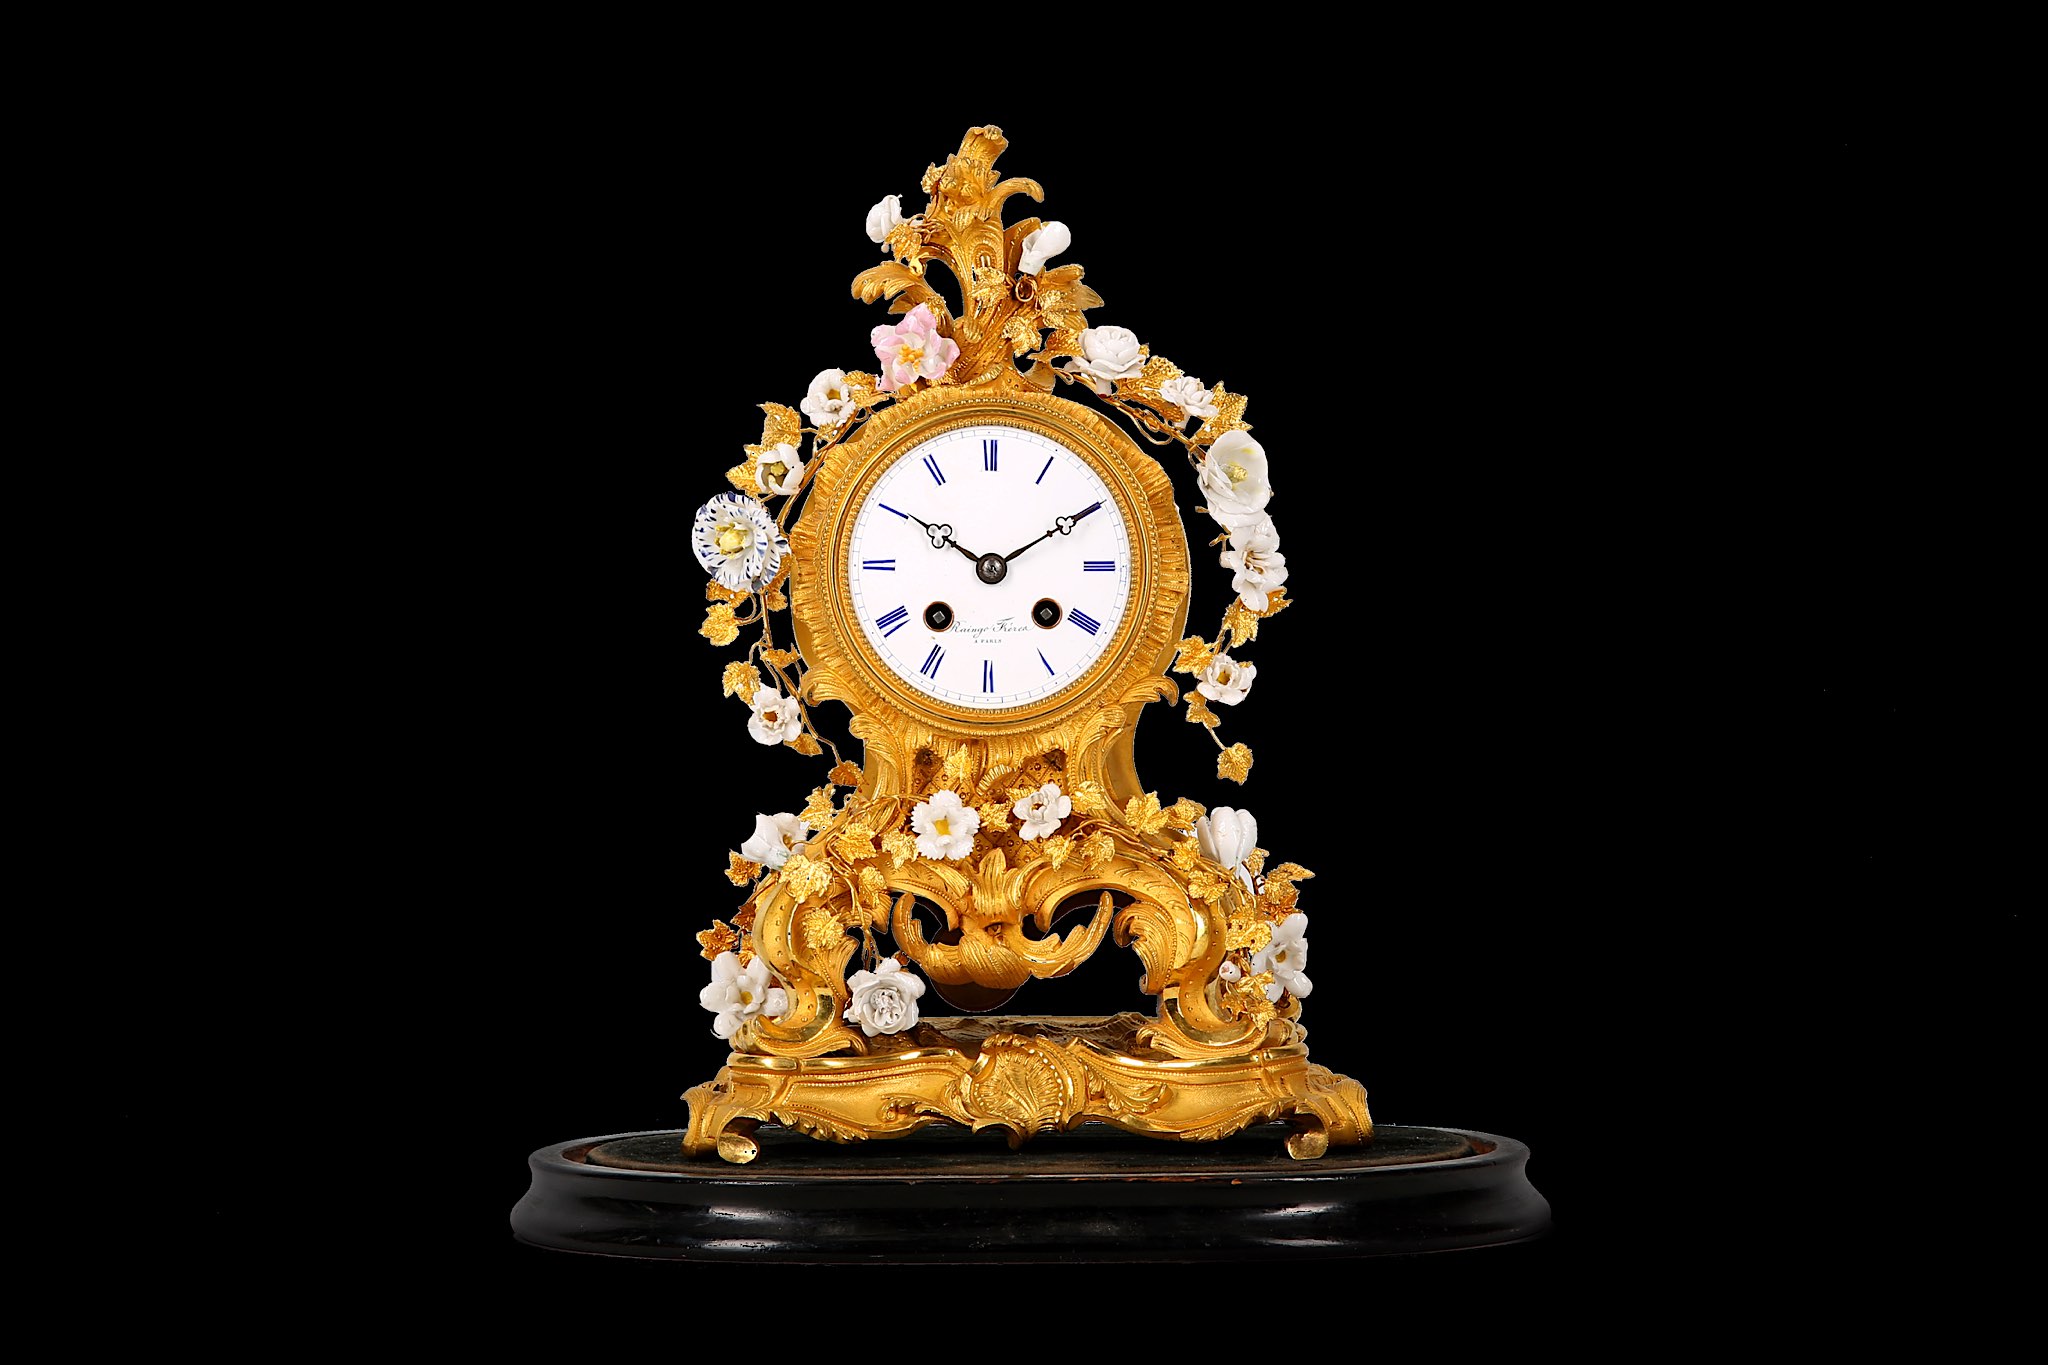 A MID 19TH CENTURY FRENCH GILT BRONZE AND PORCELAIN MOUNTED MANTEL CLOCK BY RAINGO FRERES, PARIS the